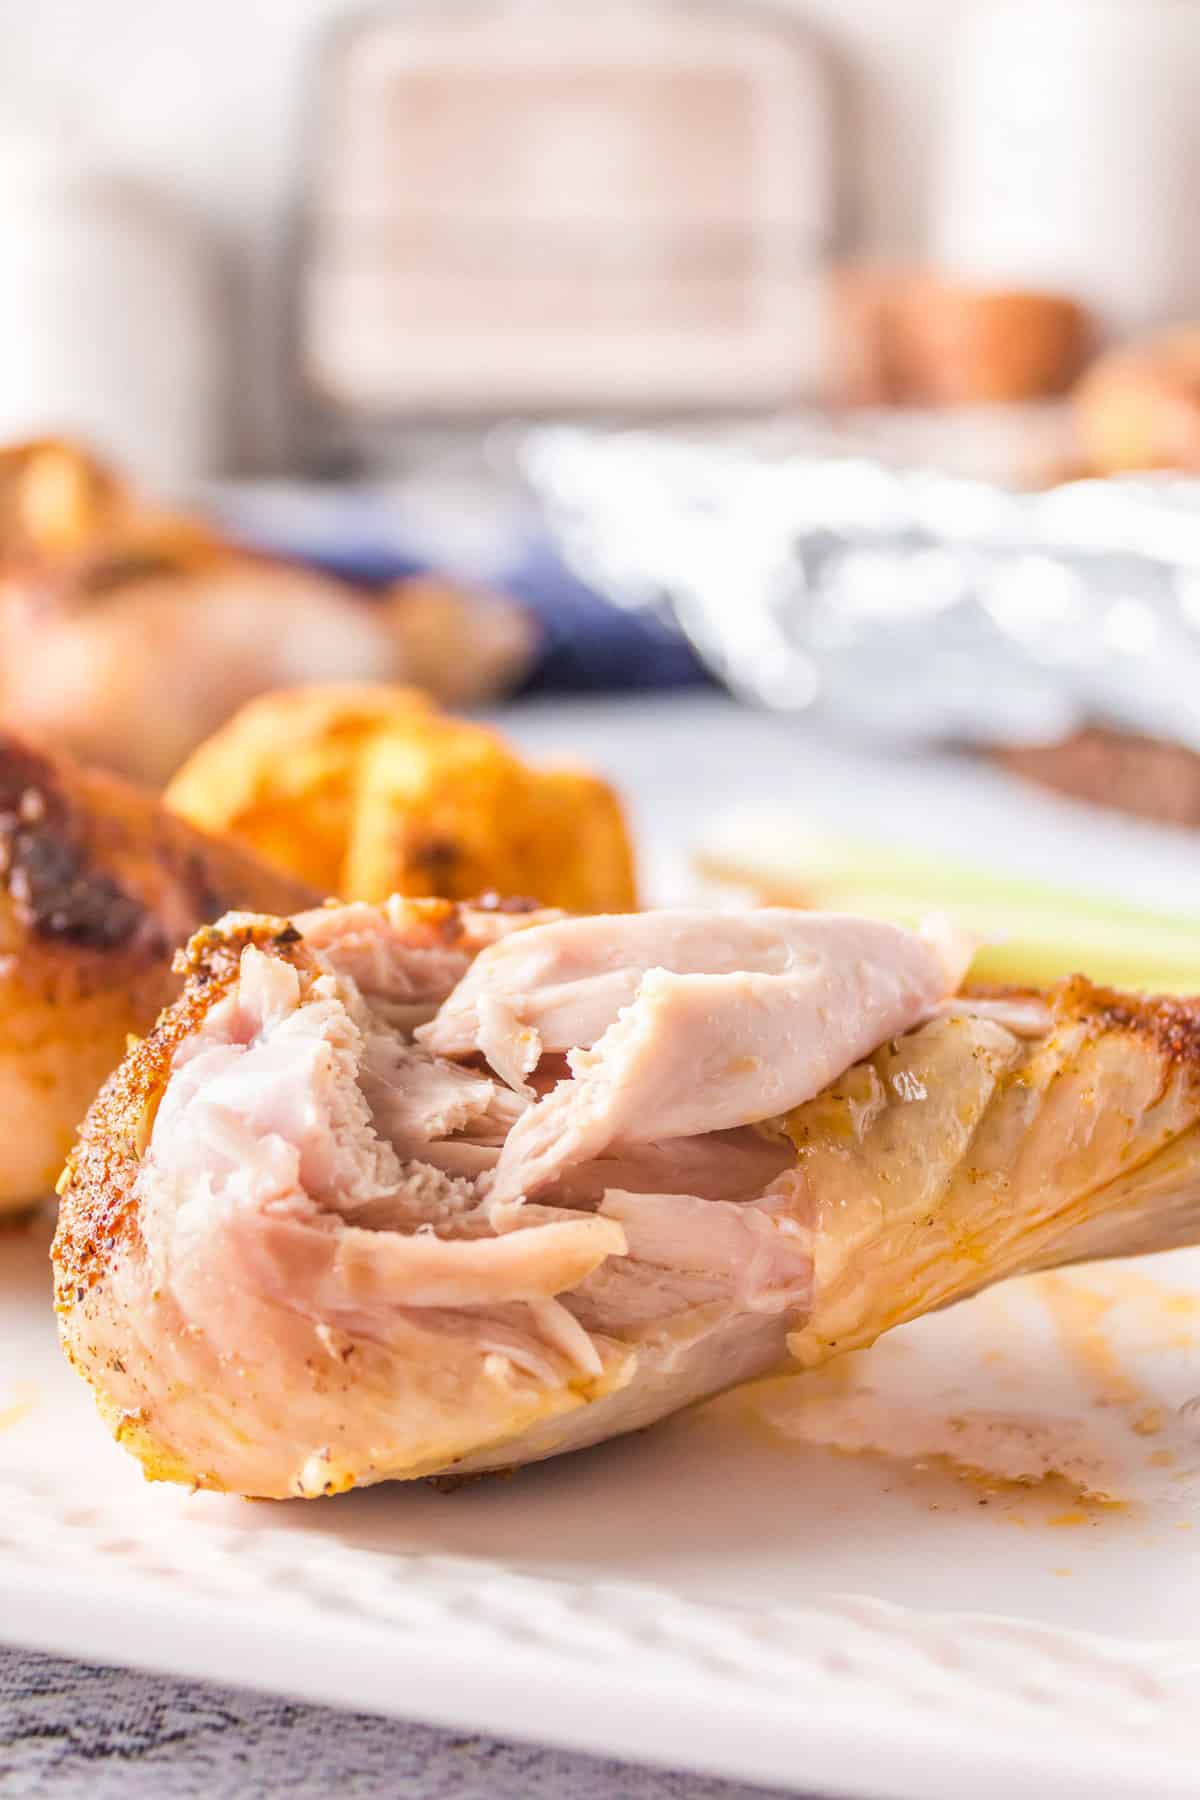 A juicy baked chicken drumsticks with a bite taken out of it.